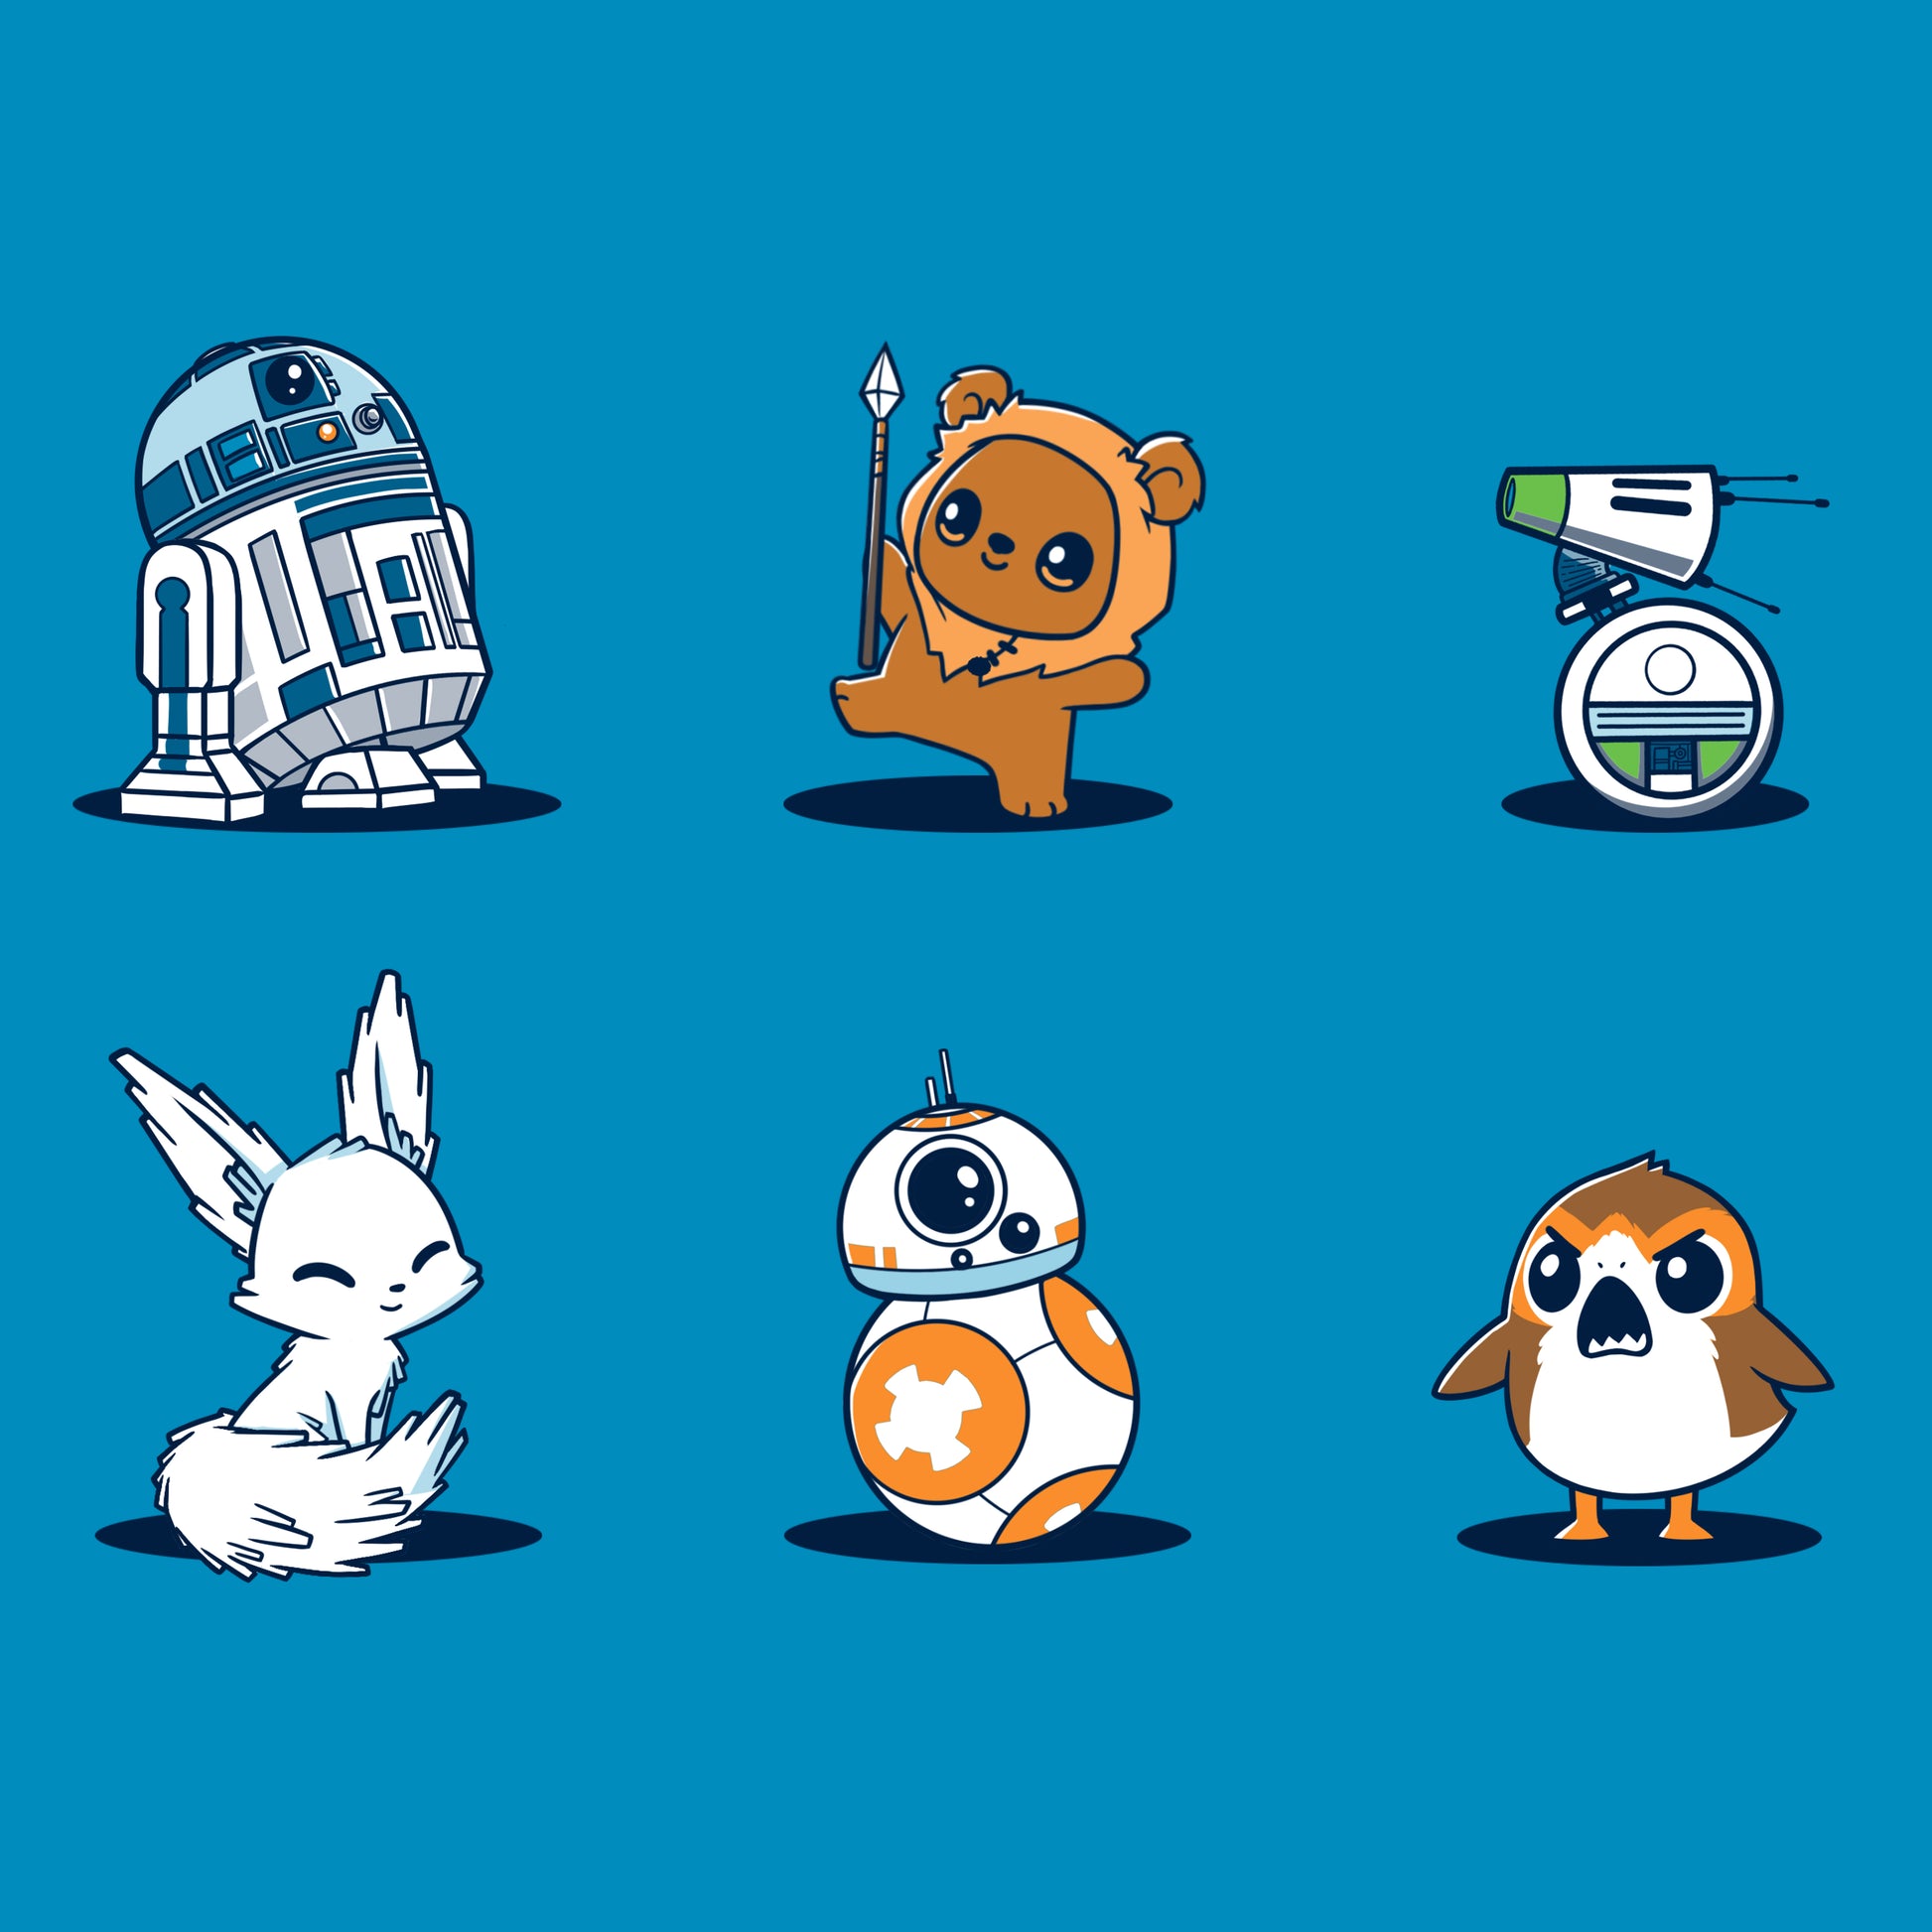 Star Wars Cuties on a blue background featuring droids and creatures. (Brand: Star Wars)